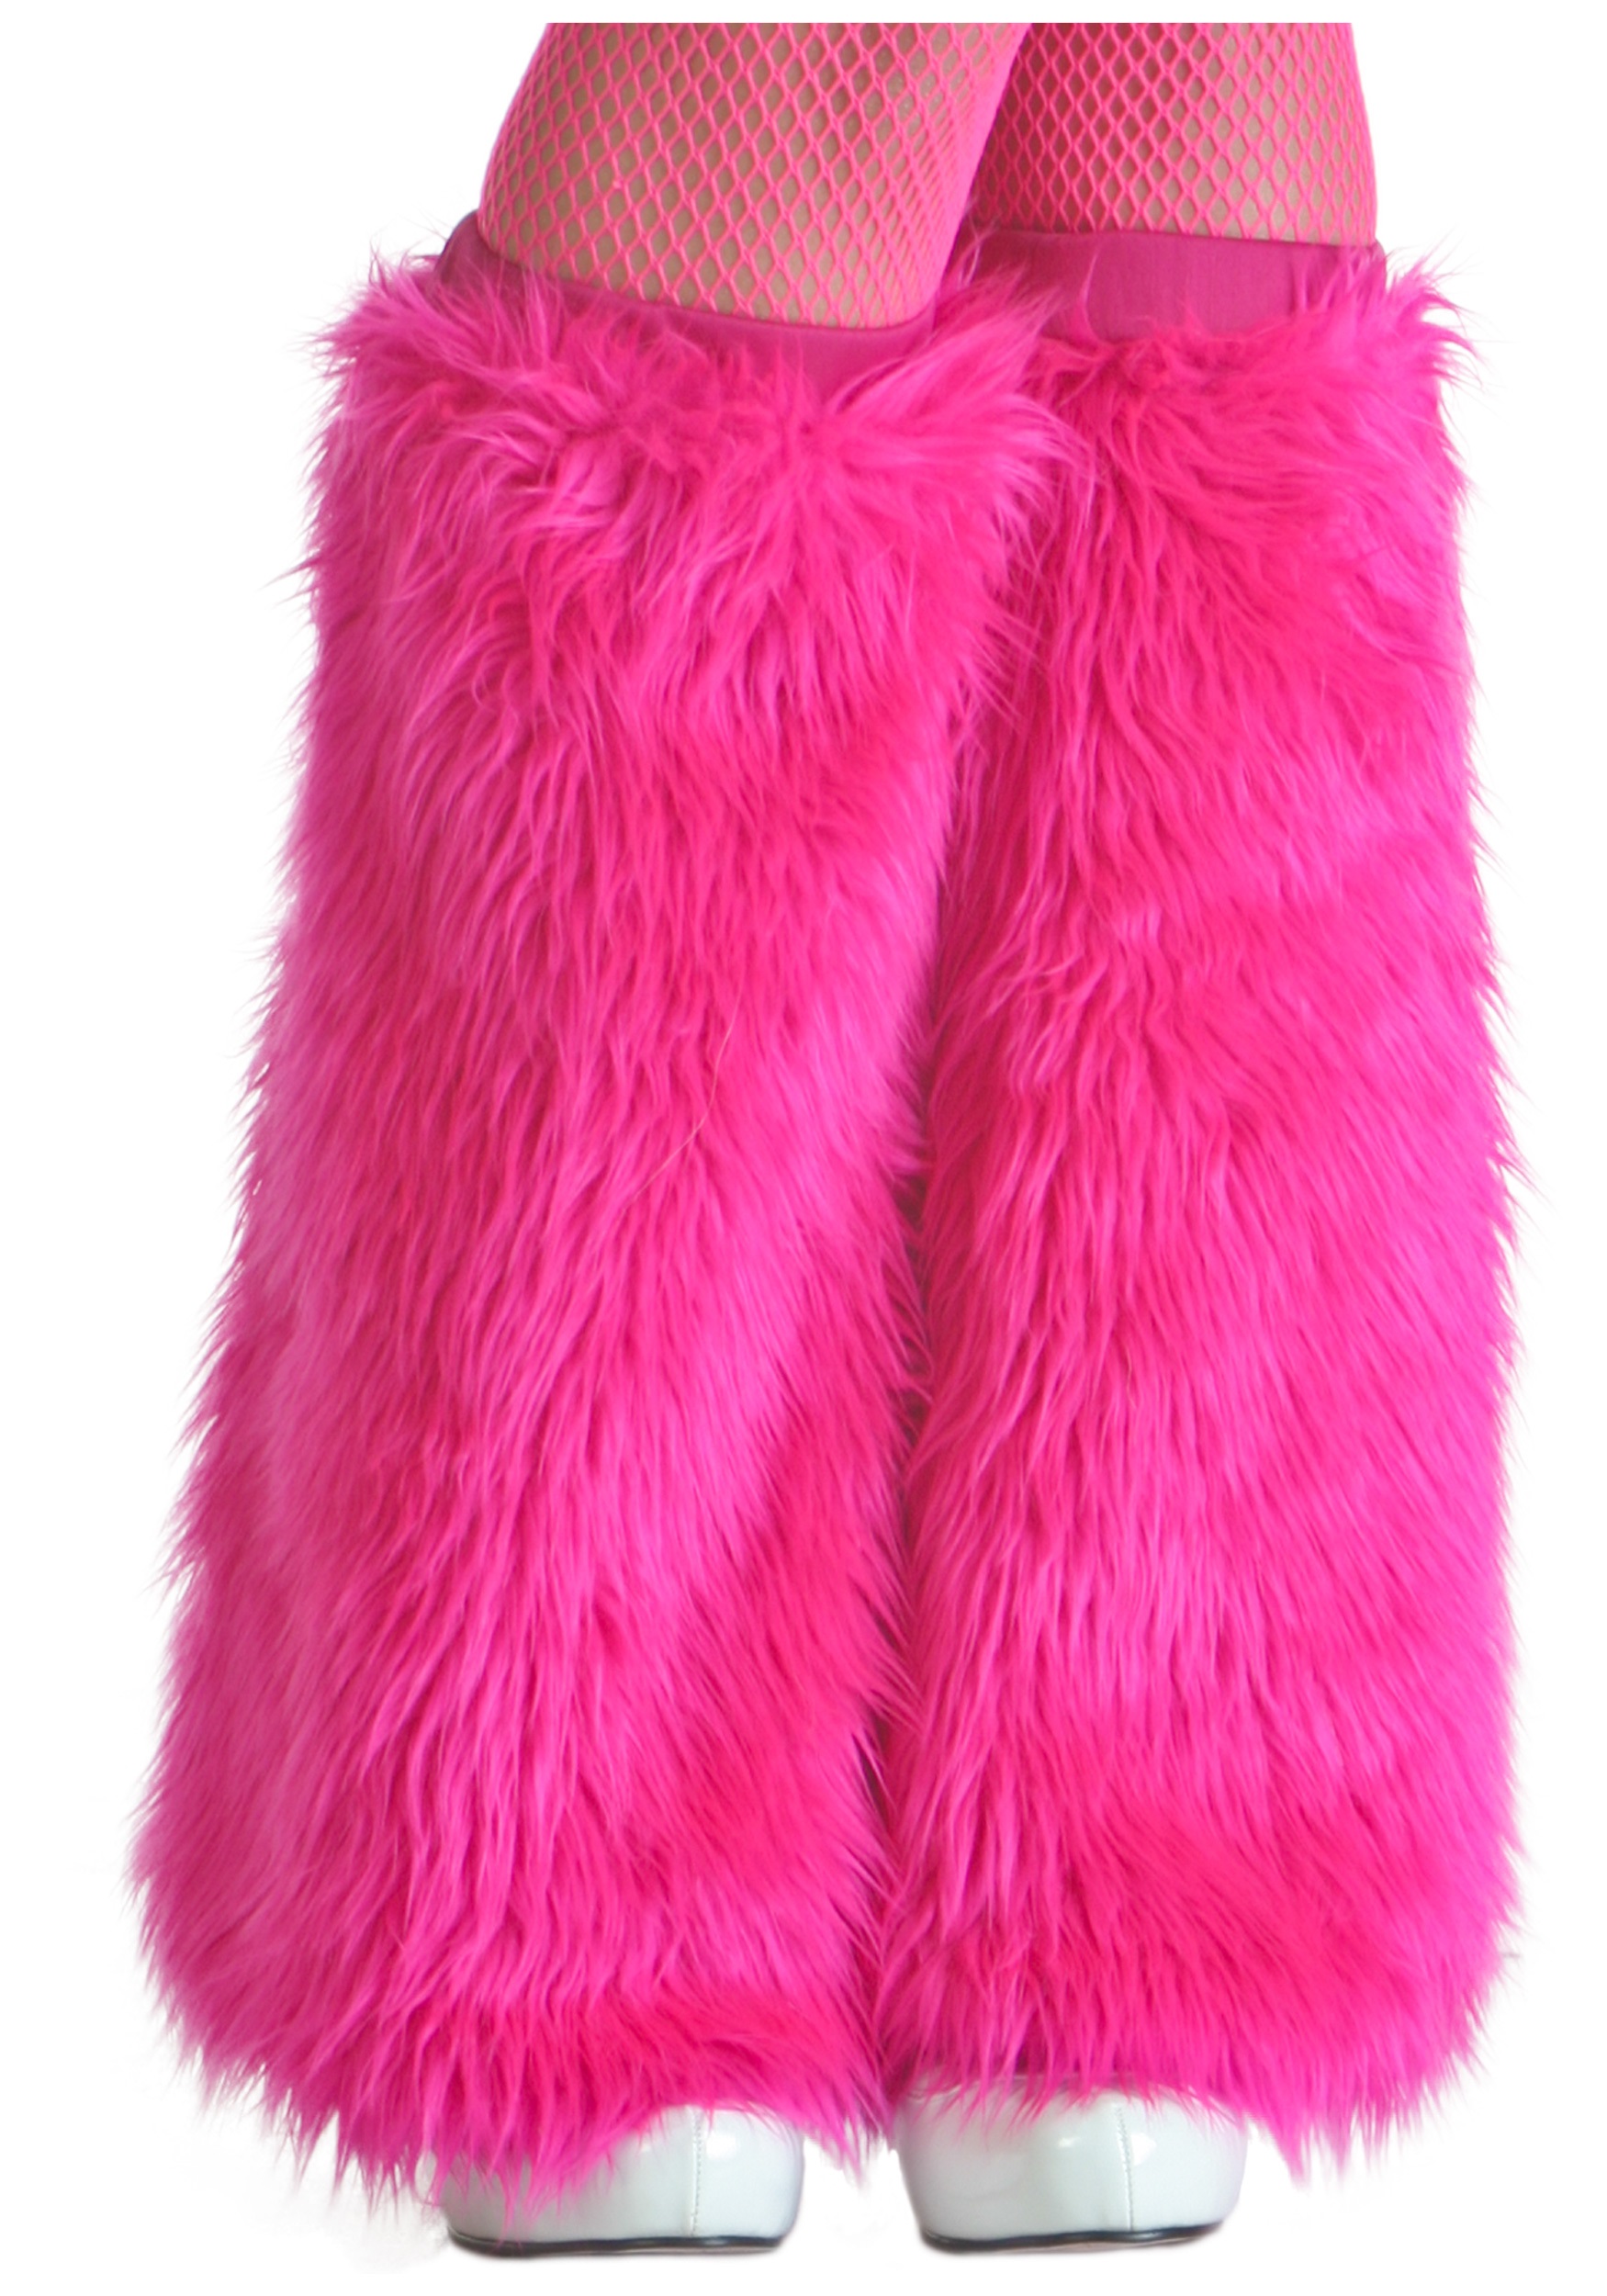 Child Pink Furry Boot Covers - Halloween Costume Ideas 2023